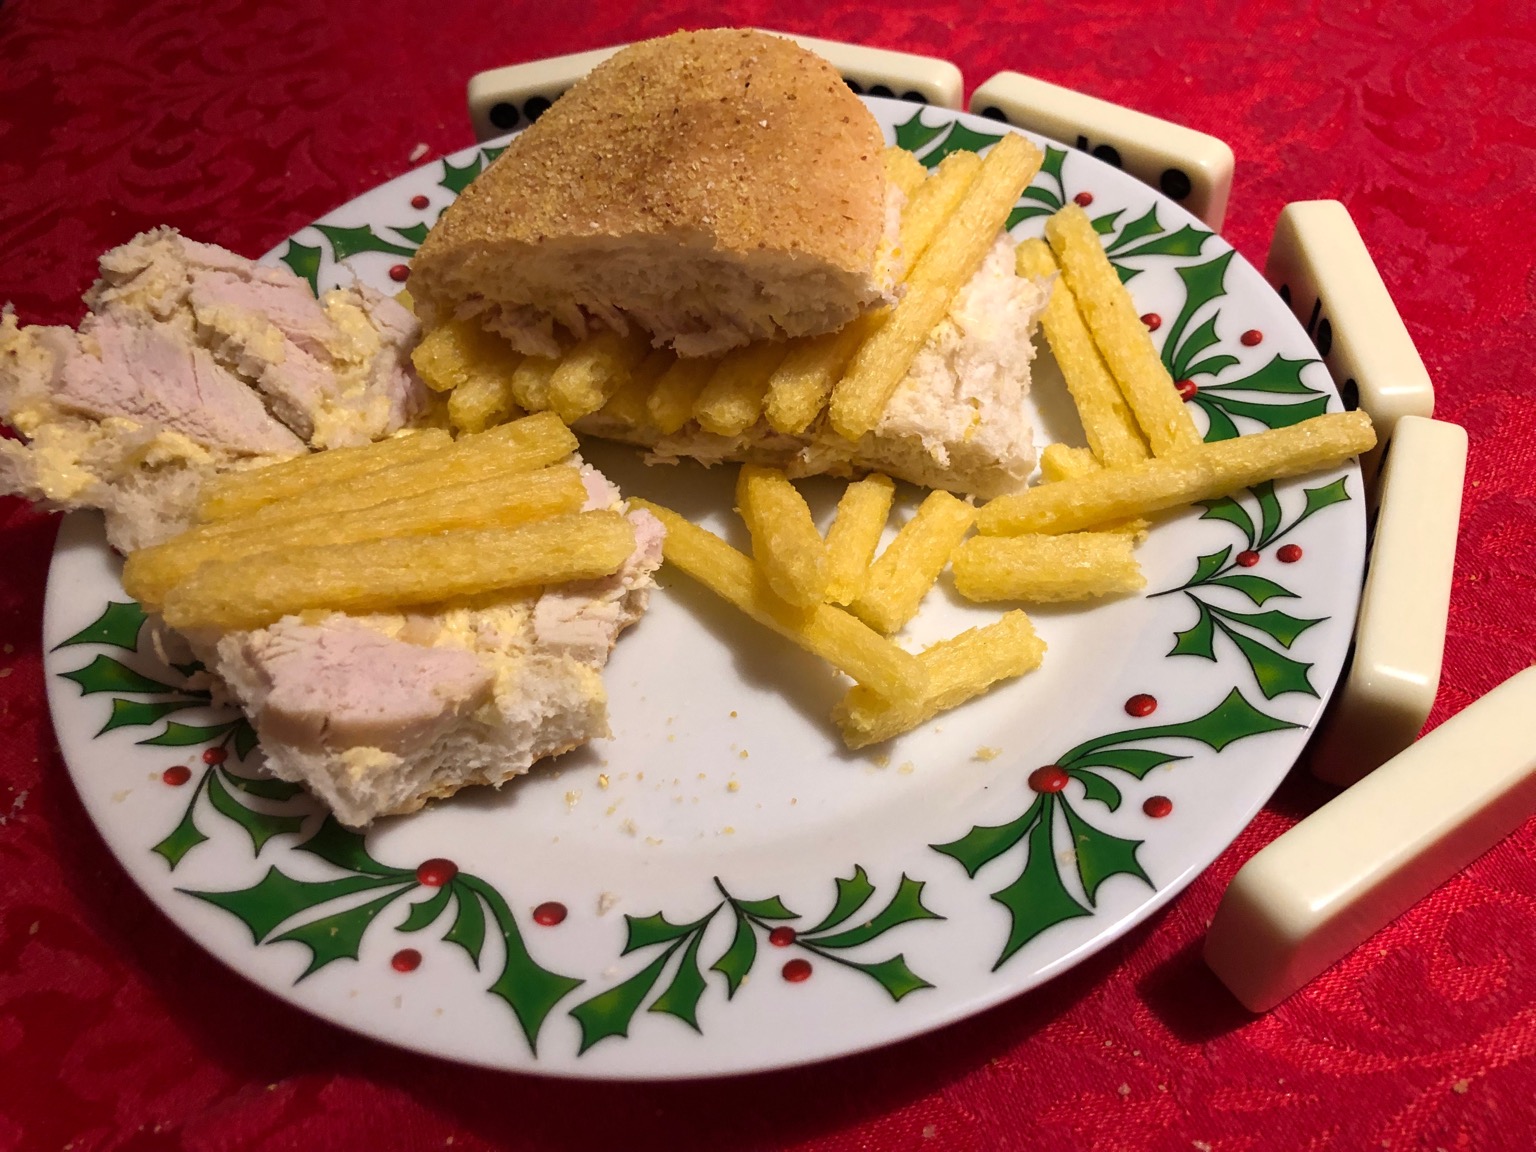 Chipsticks and meat in a roll, half open and bitten